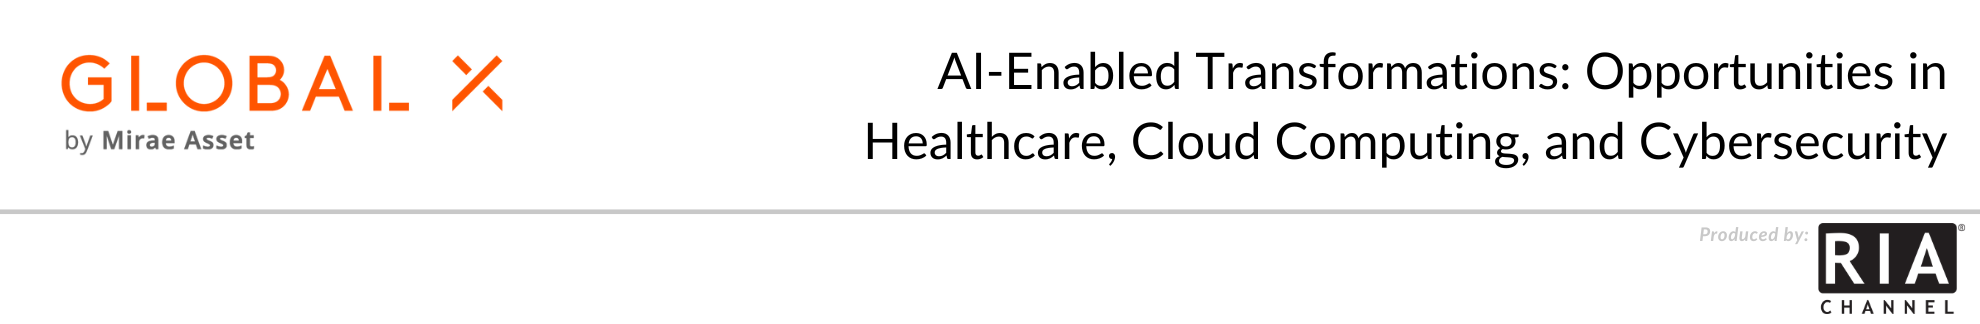 AI-Enabled Transformations: Opportunities in Healthcare, Cloud Computing, and Cybersecurity